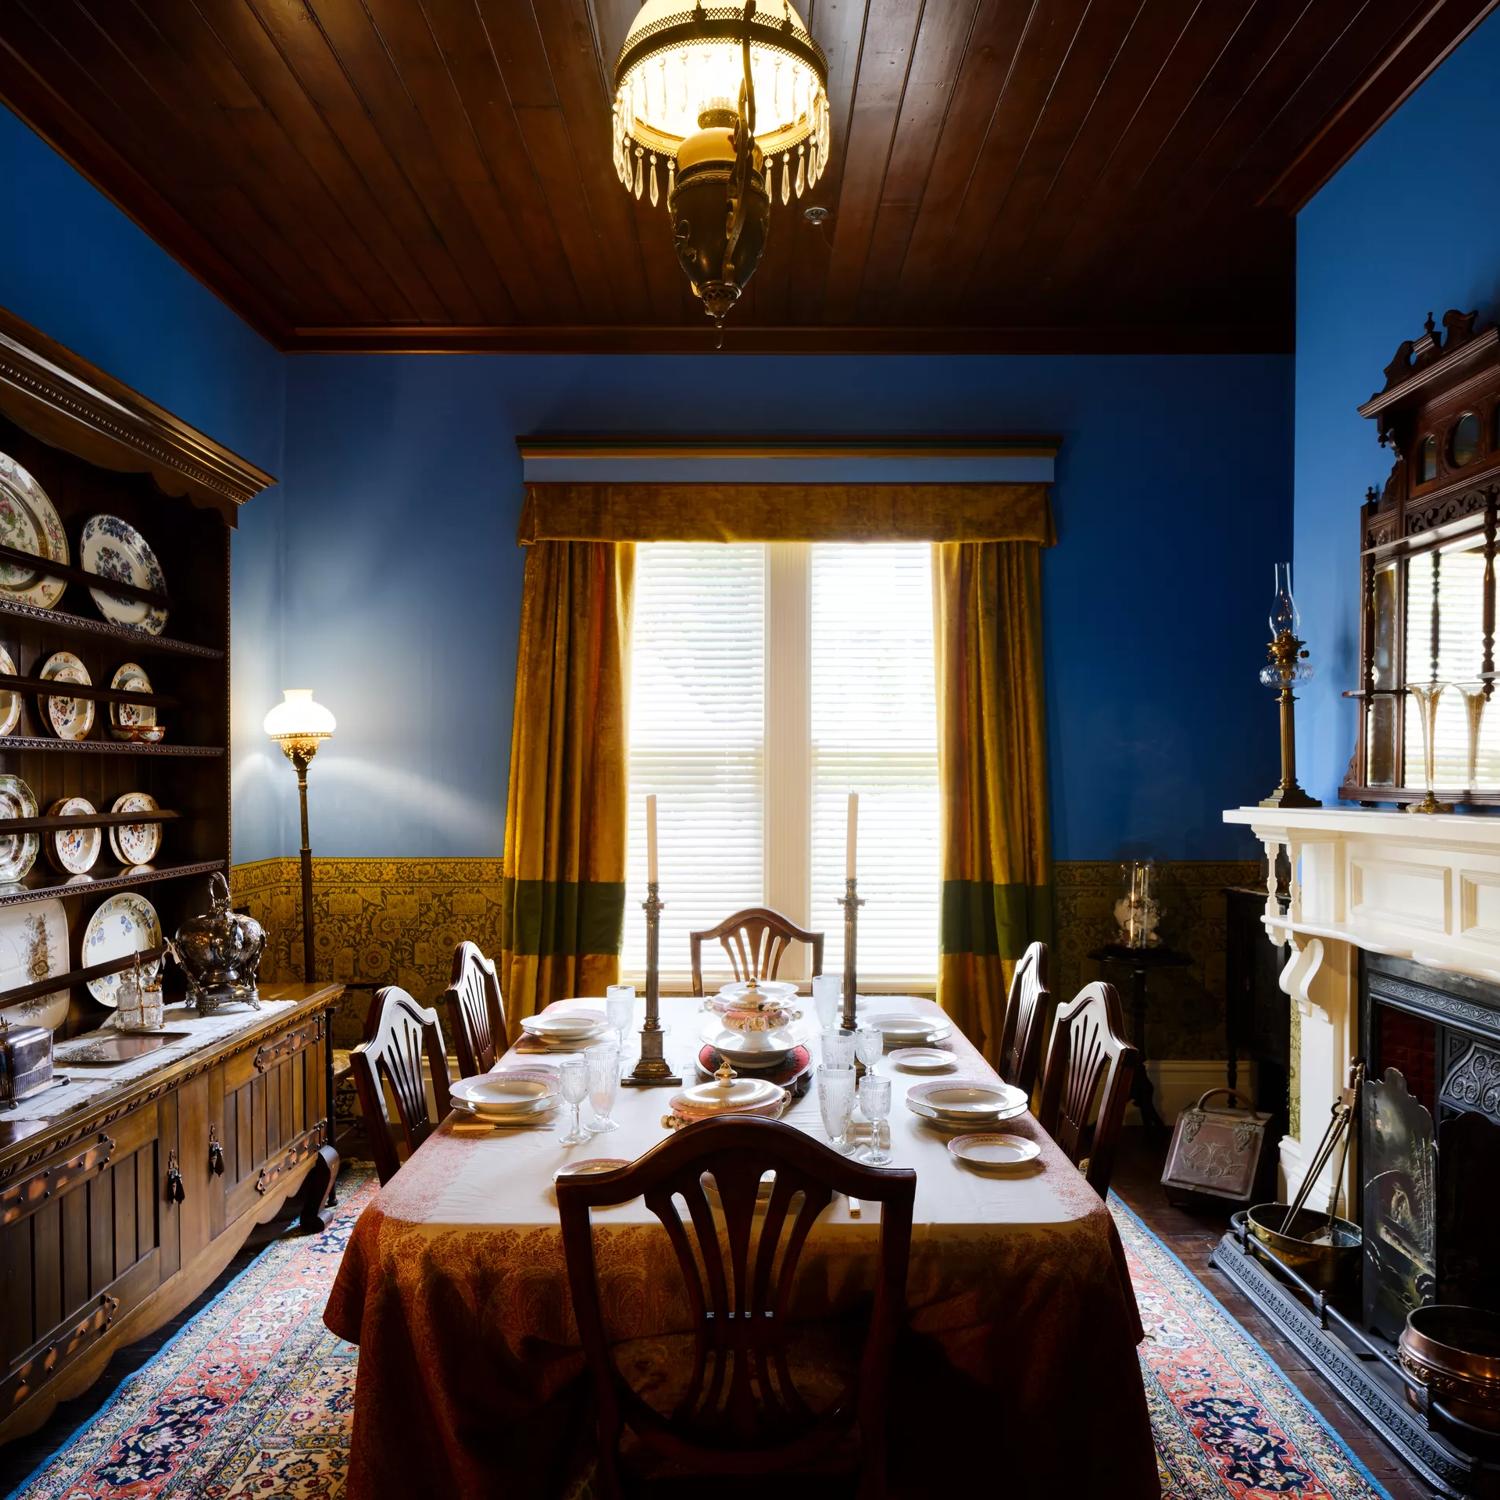 The dining room of Katherine Mansfields house with blue painted walls and a dinner setting on the table.